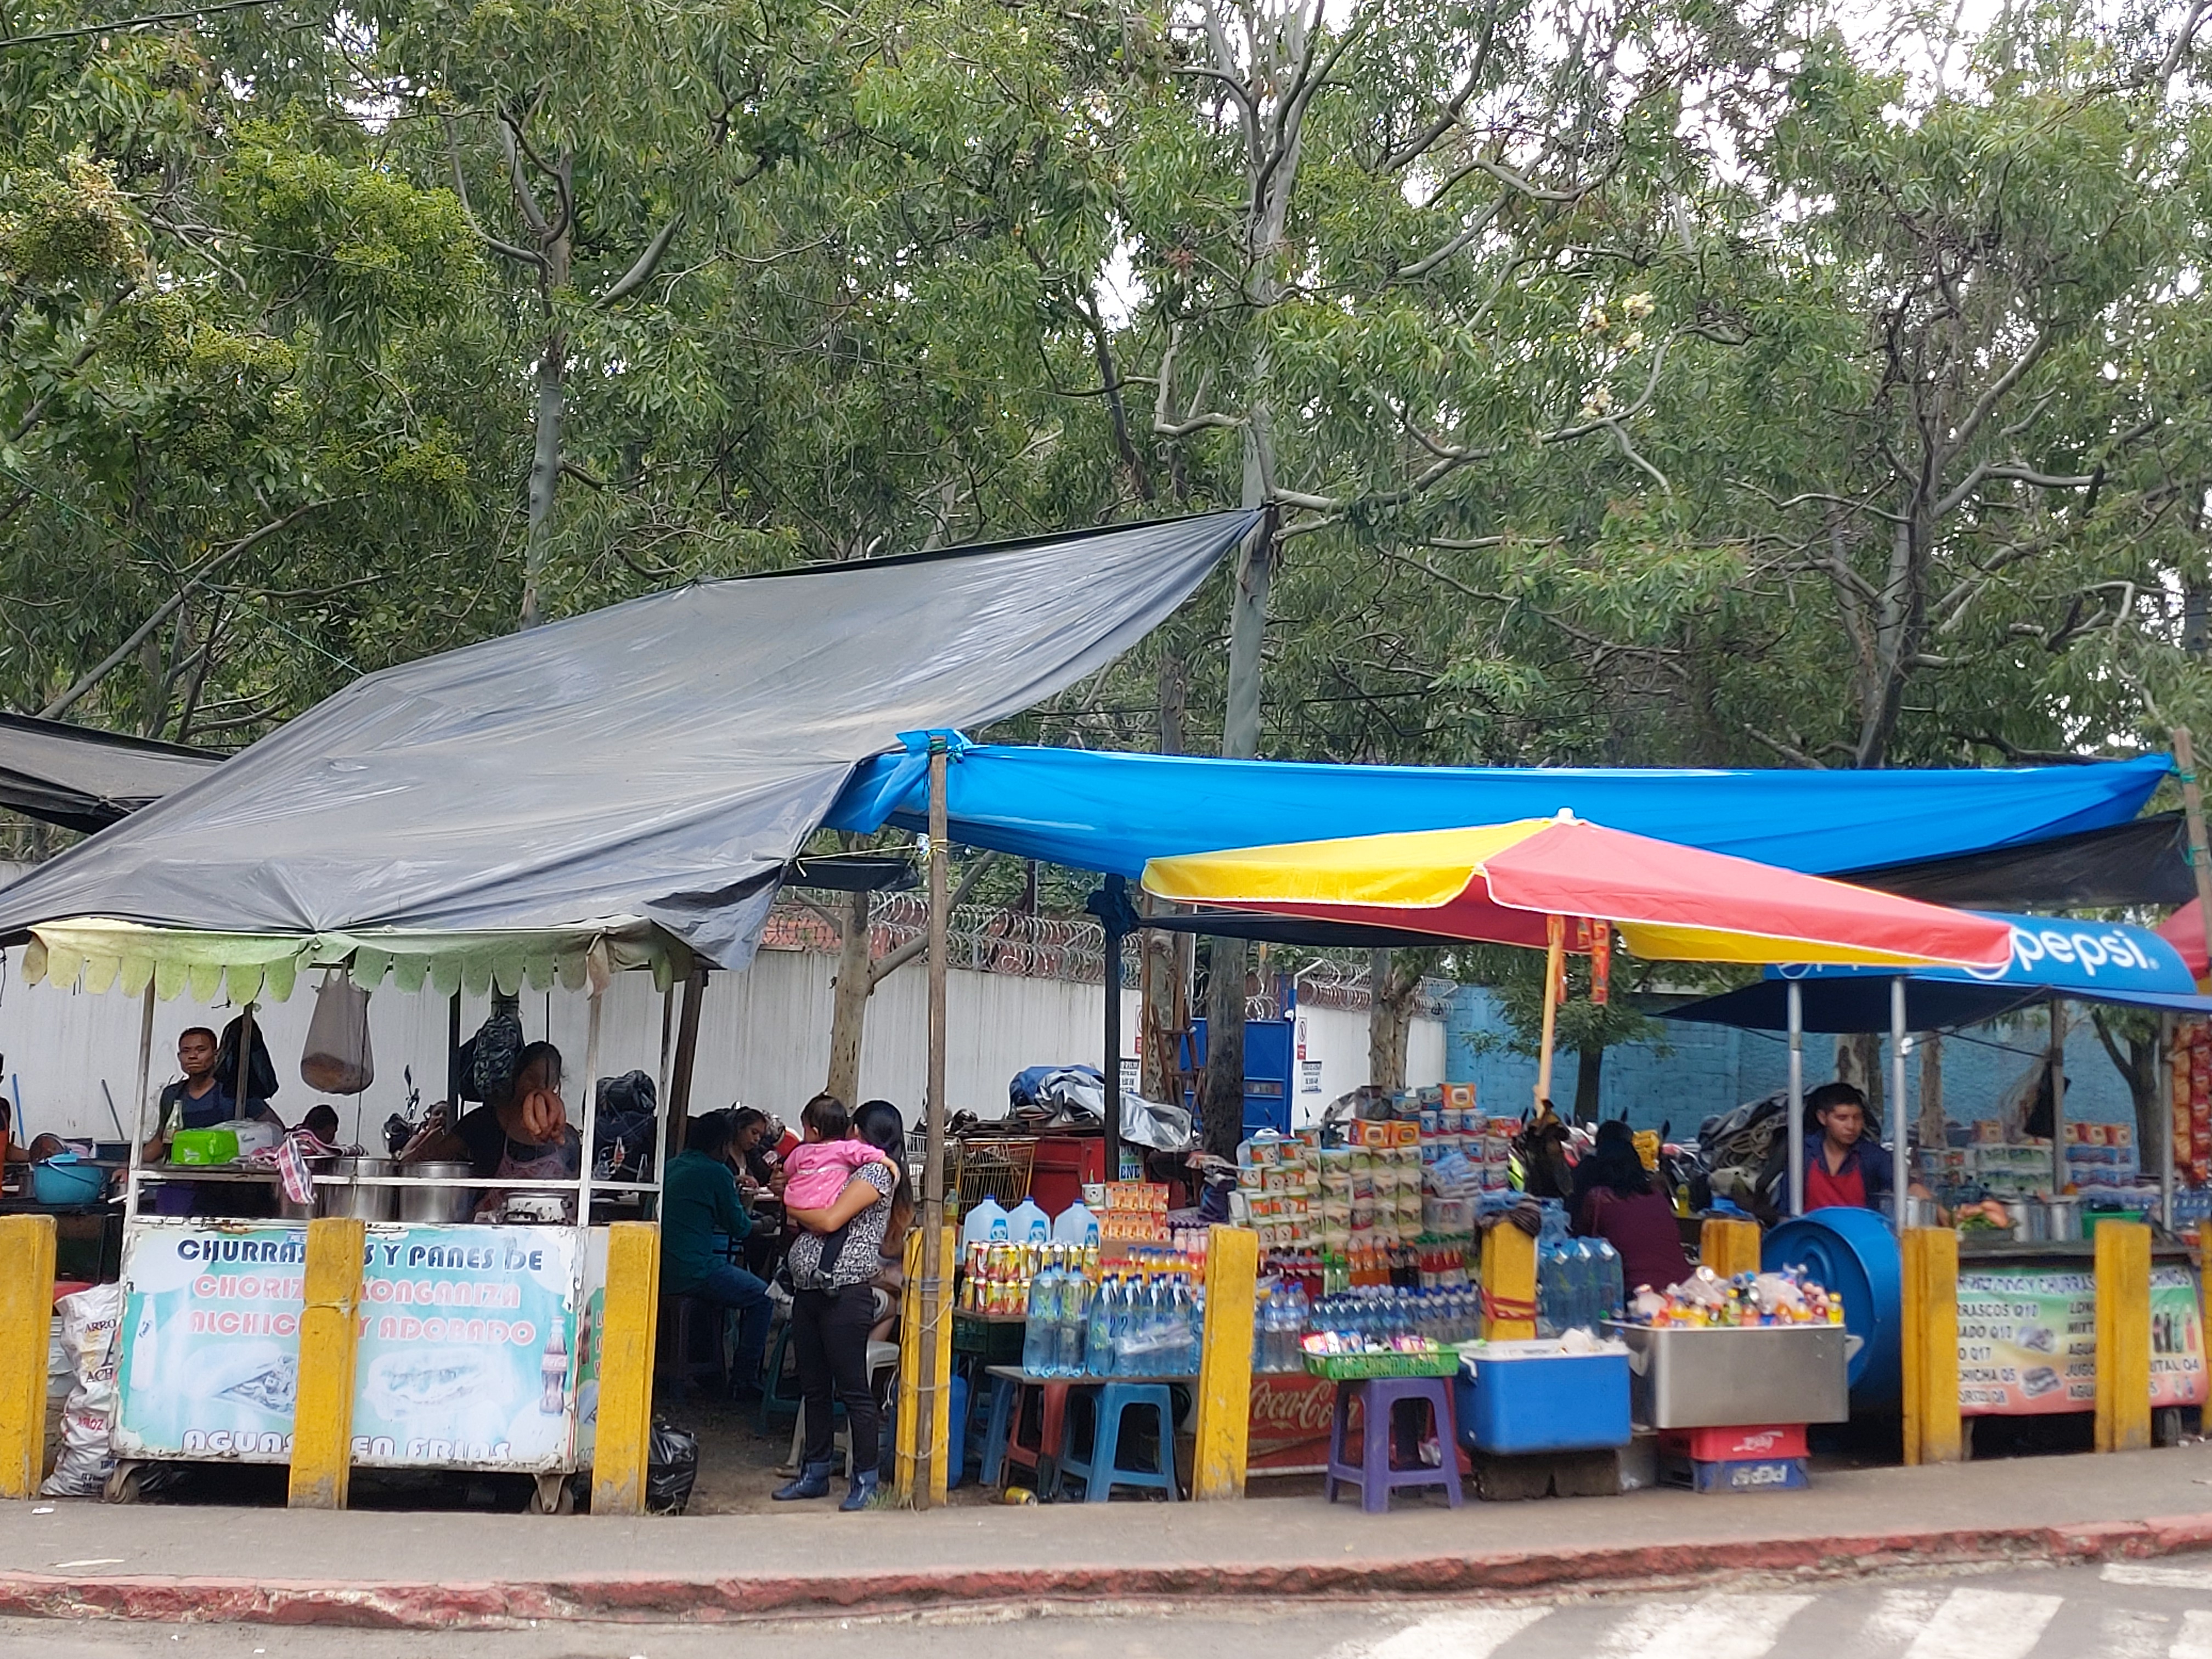 Informal-food-vendors-on-street-colorful-tents